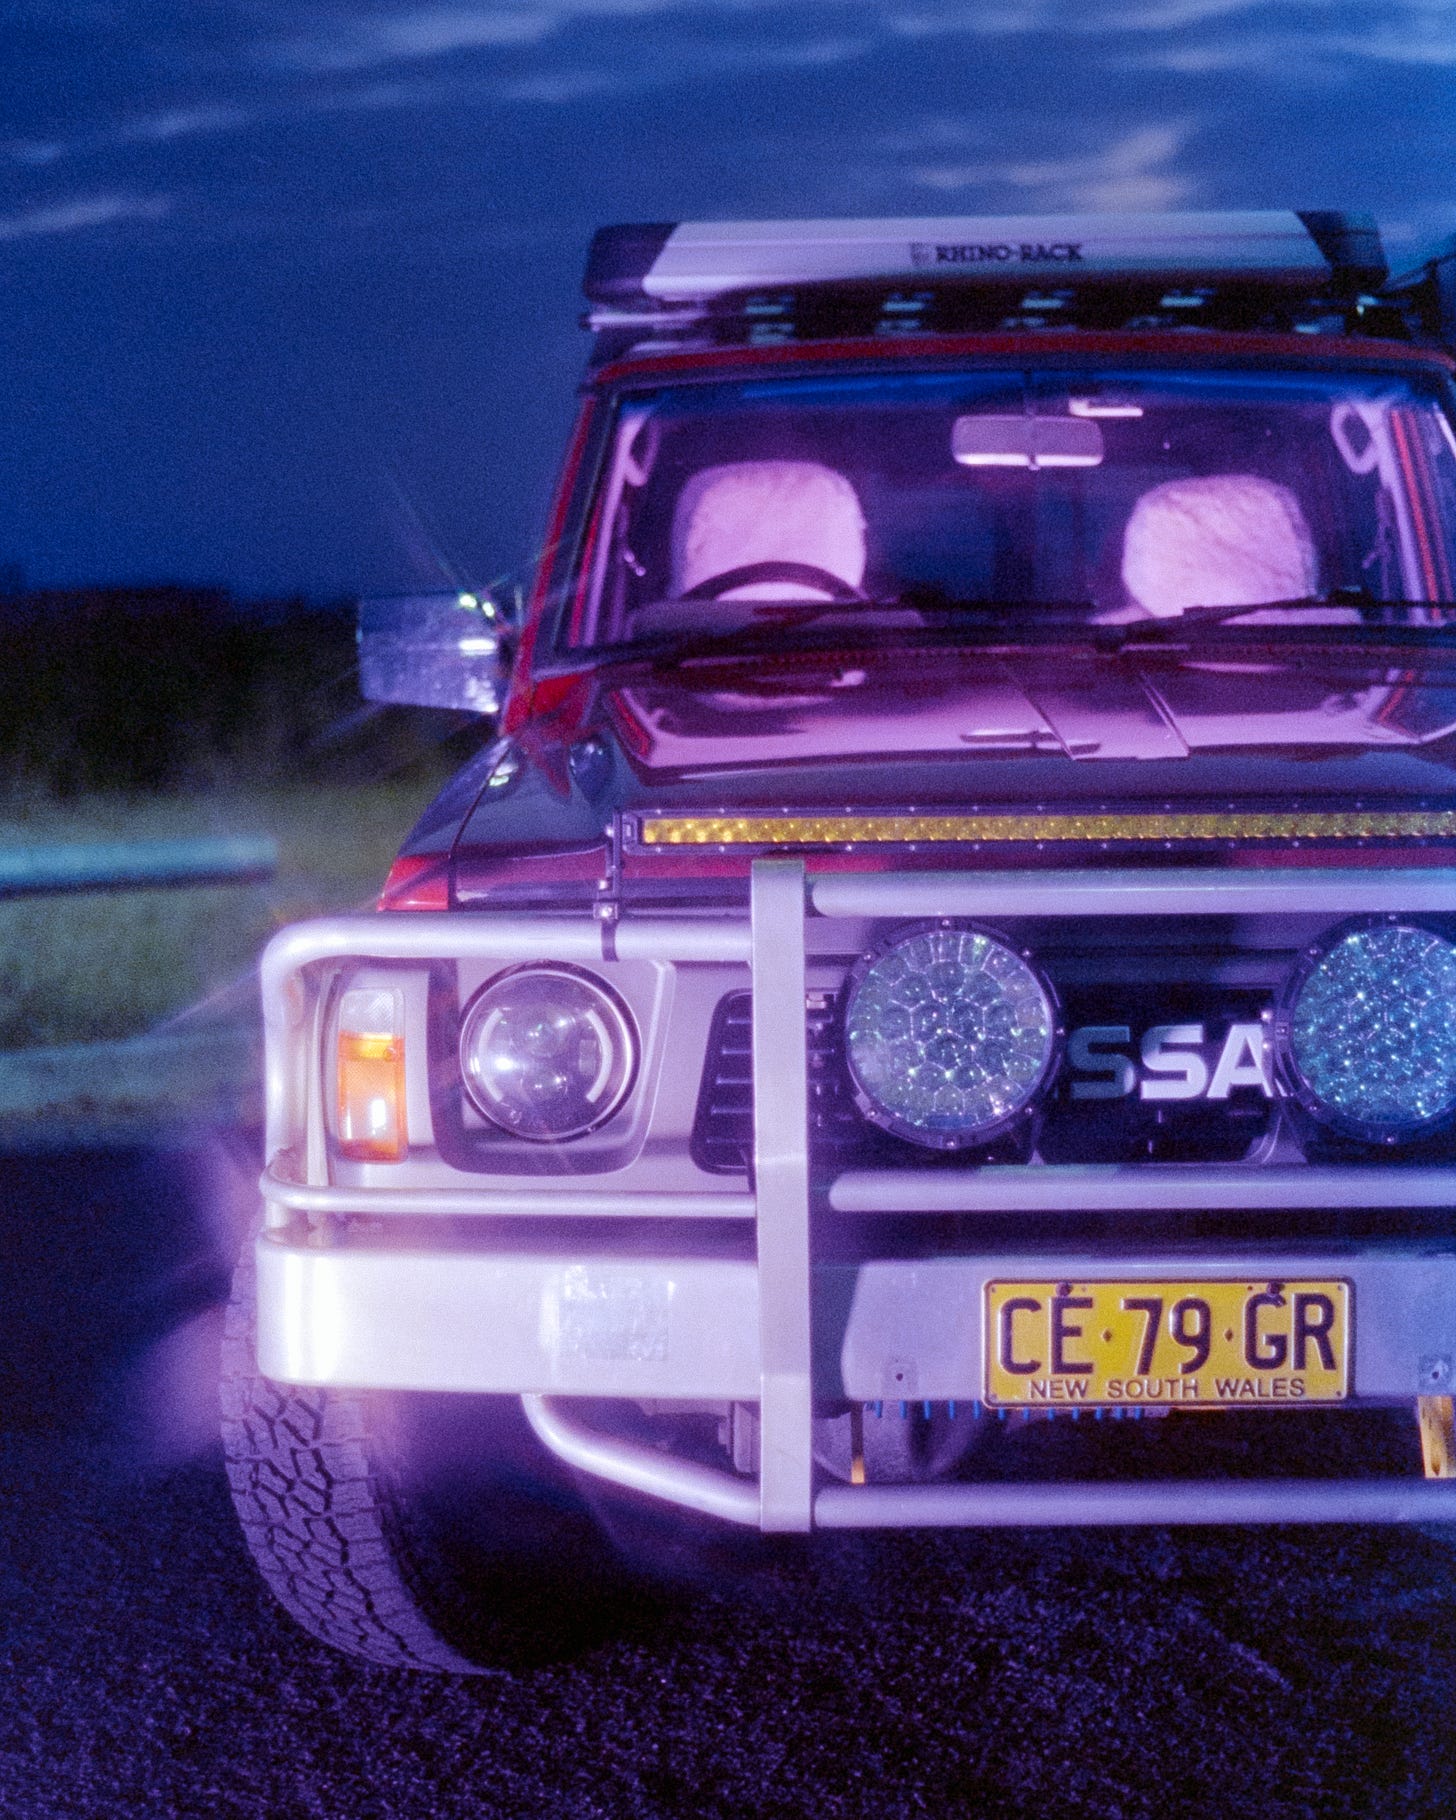 A glowy purple close up image of Josie's 1991 GQ Patrol. She used purple lights and a cross screen filter to purposely make the light shine back like little stars